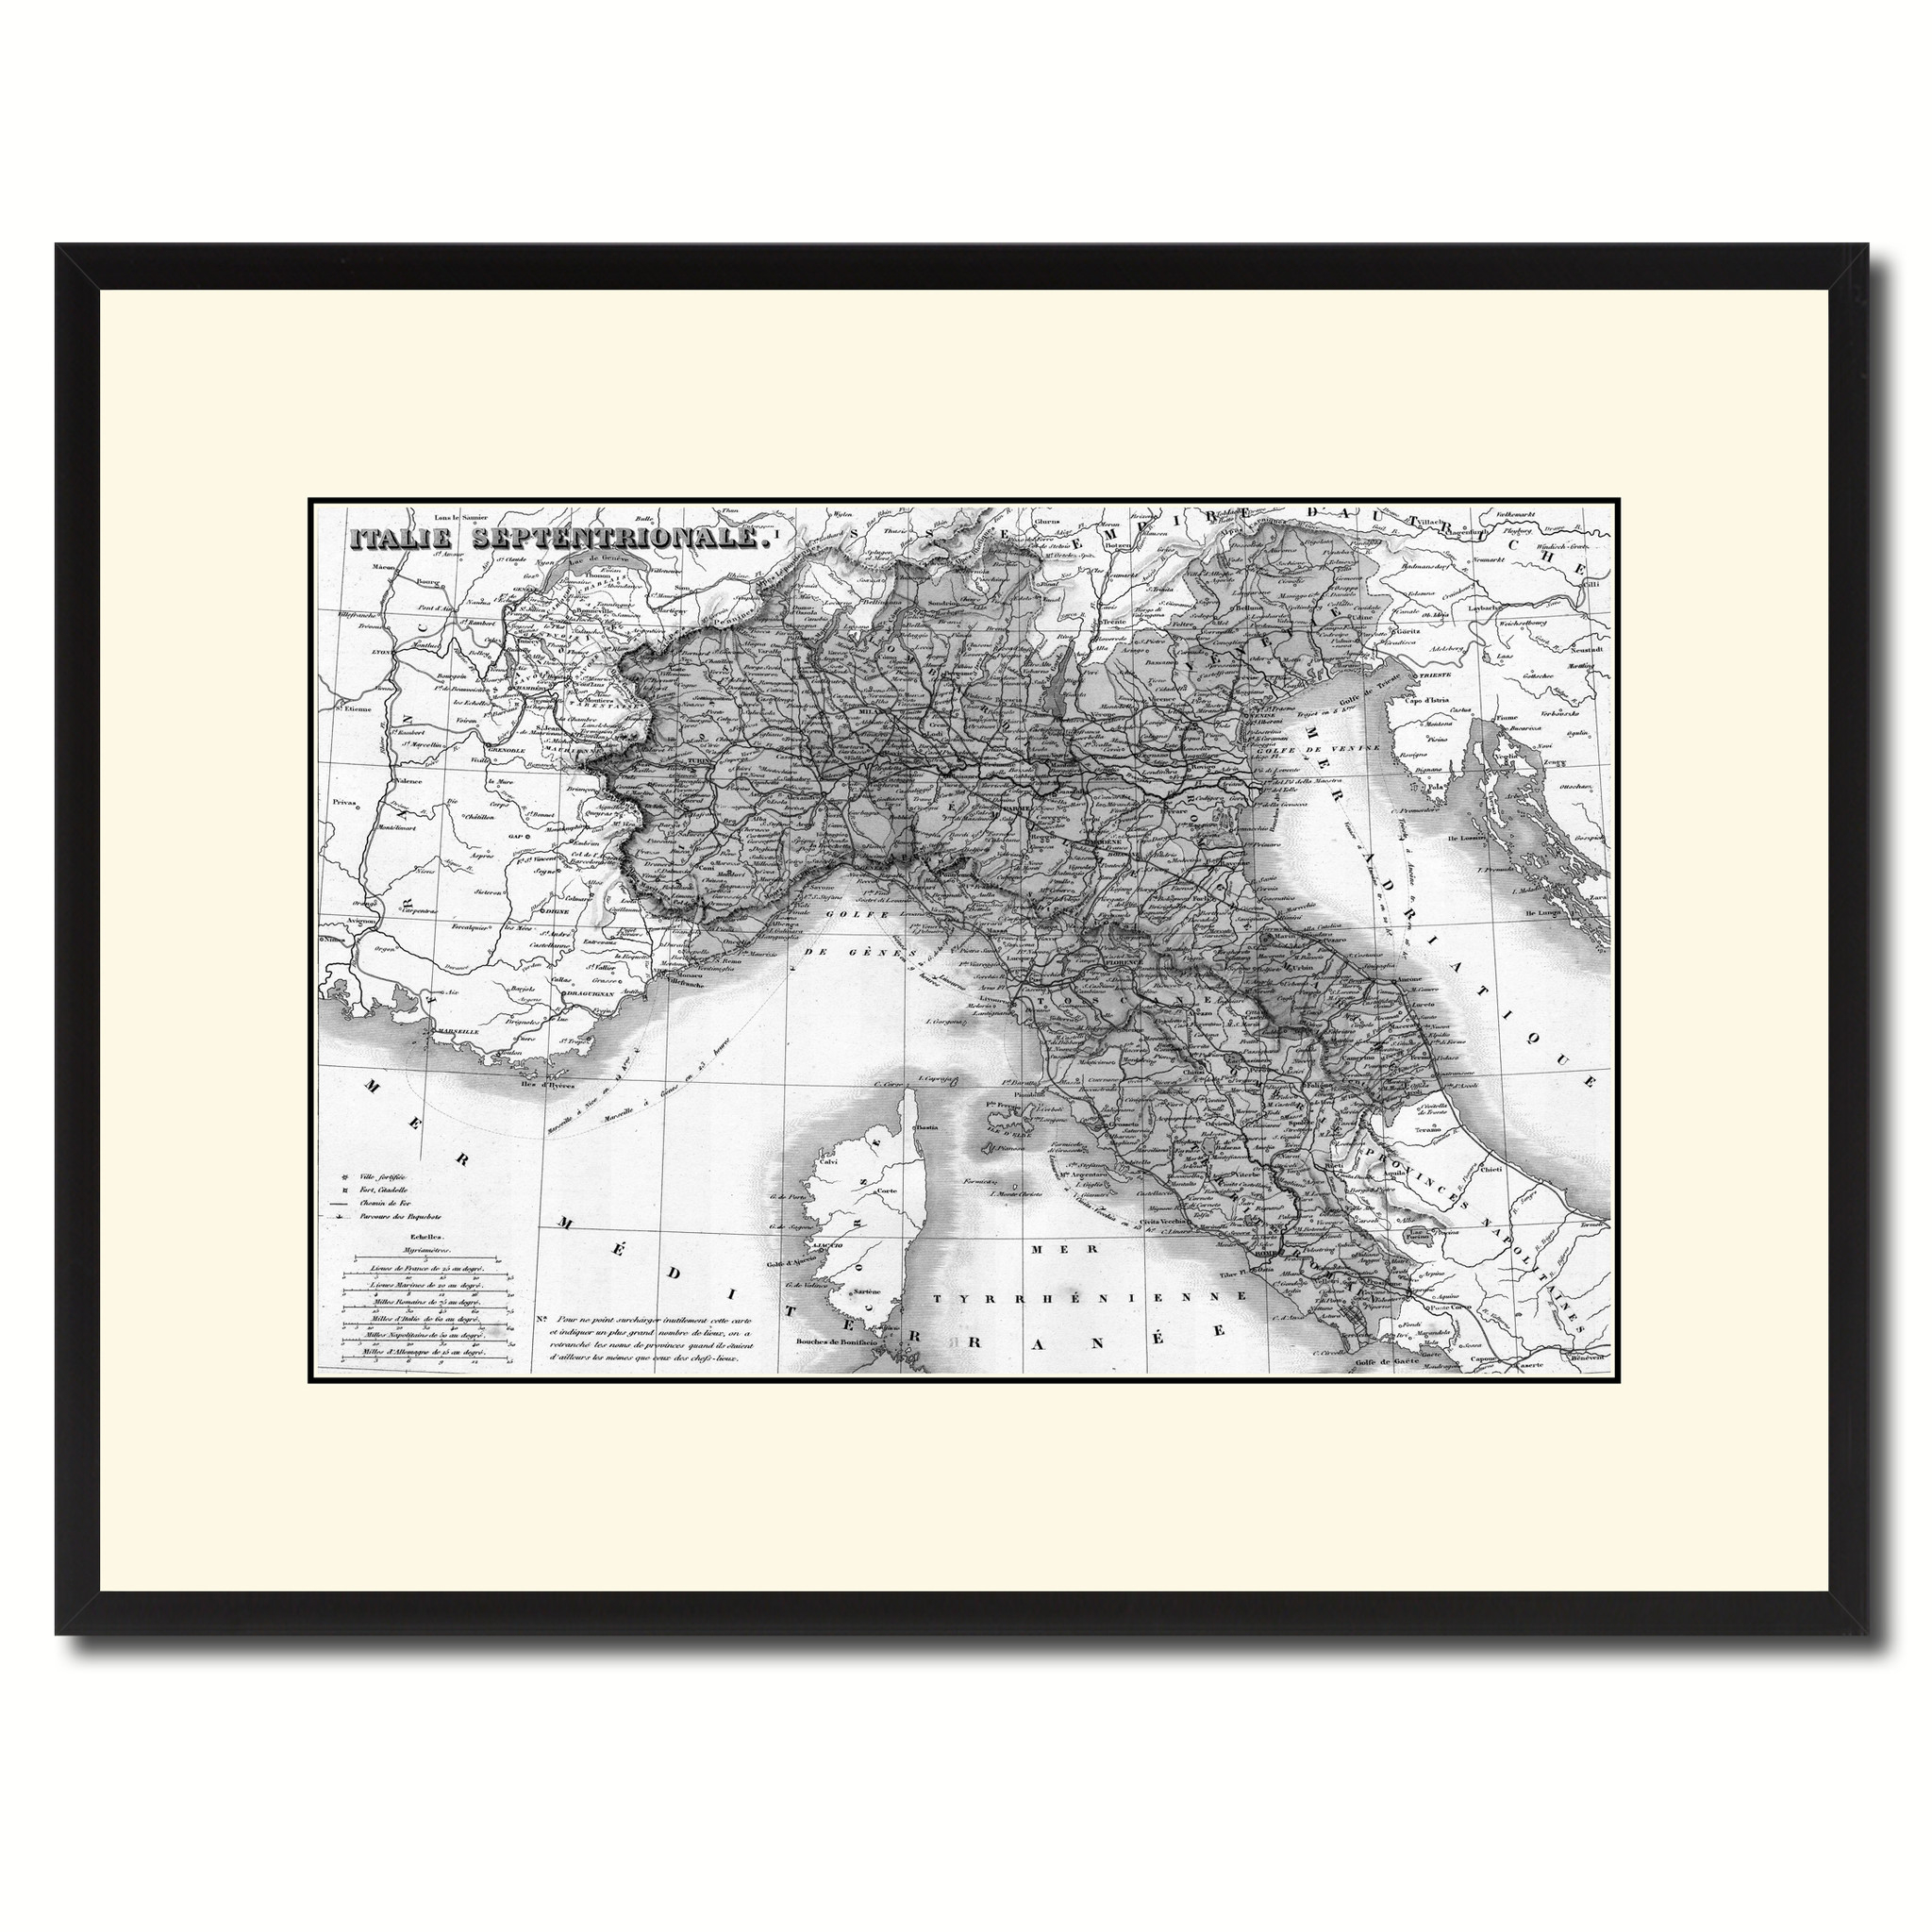 North Italy Vintage B&w Map Canvas Print, Picture Frame Home Decor Wall Art Gift Ideas - 16\" X 21\"